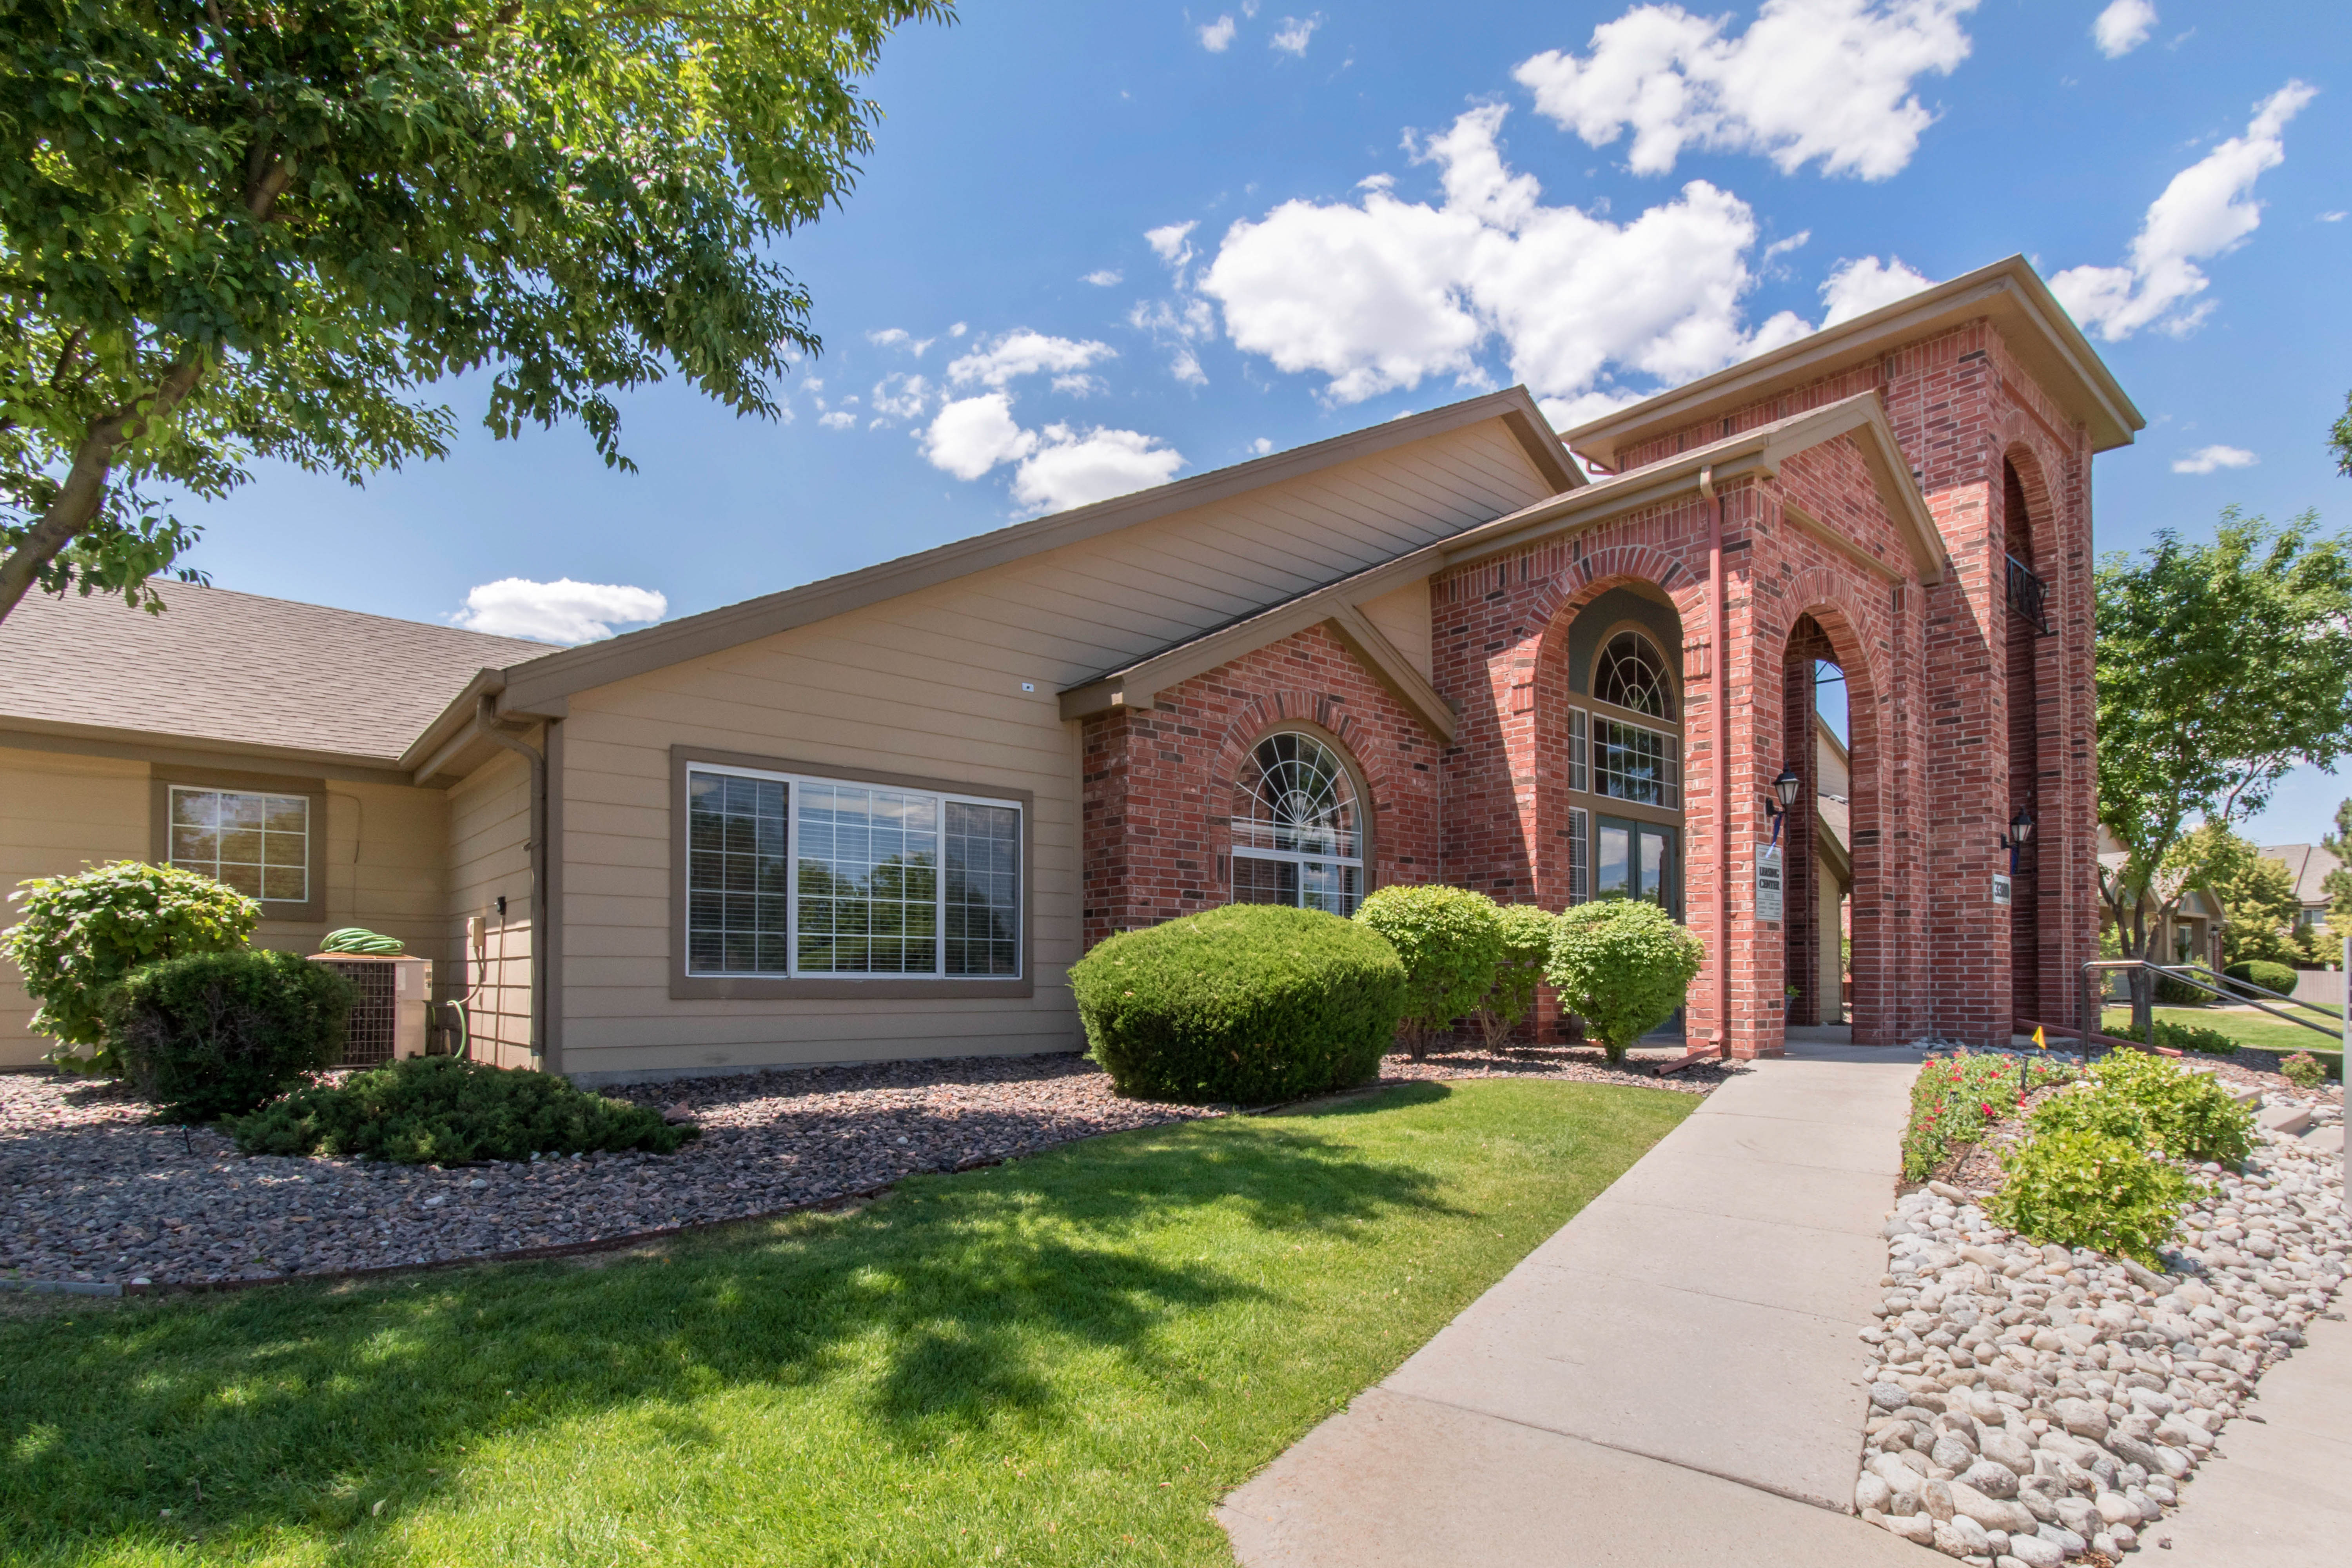 ARIUM at Highlands Ranch reviews | 3380 E County Line Rd - Highlands Ranch CO